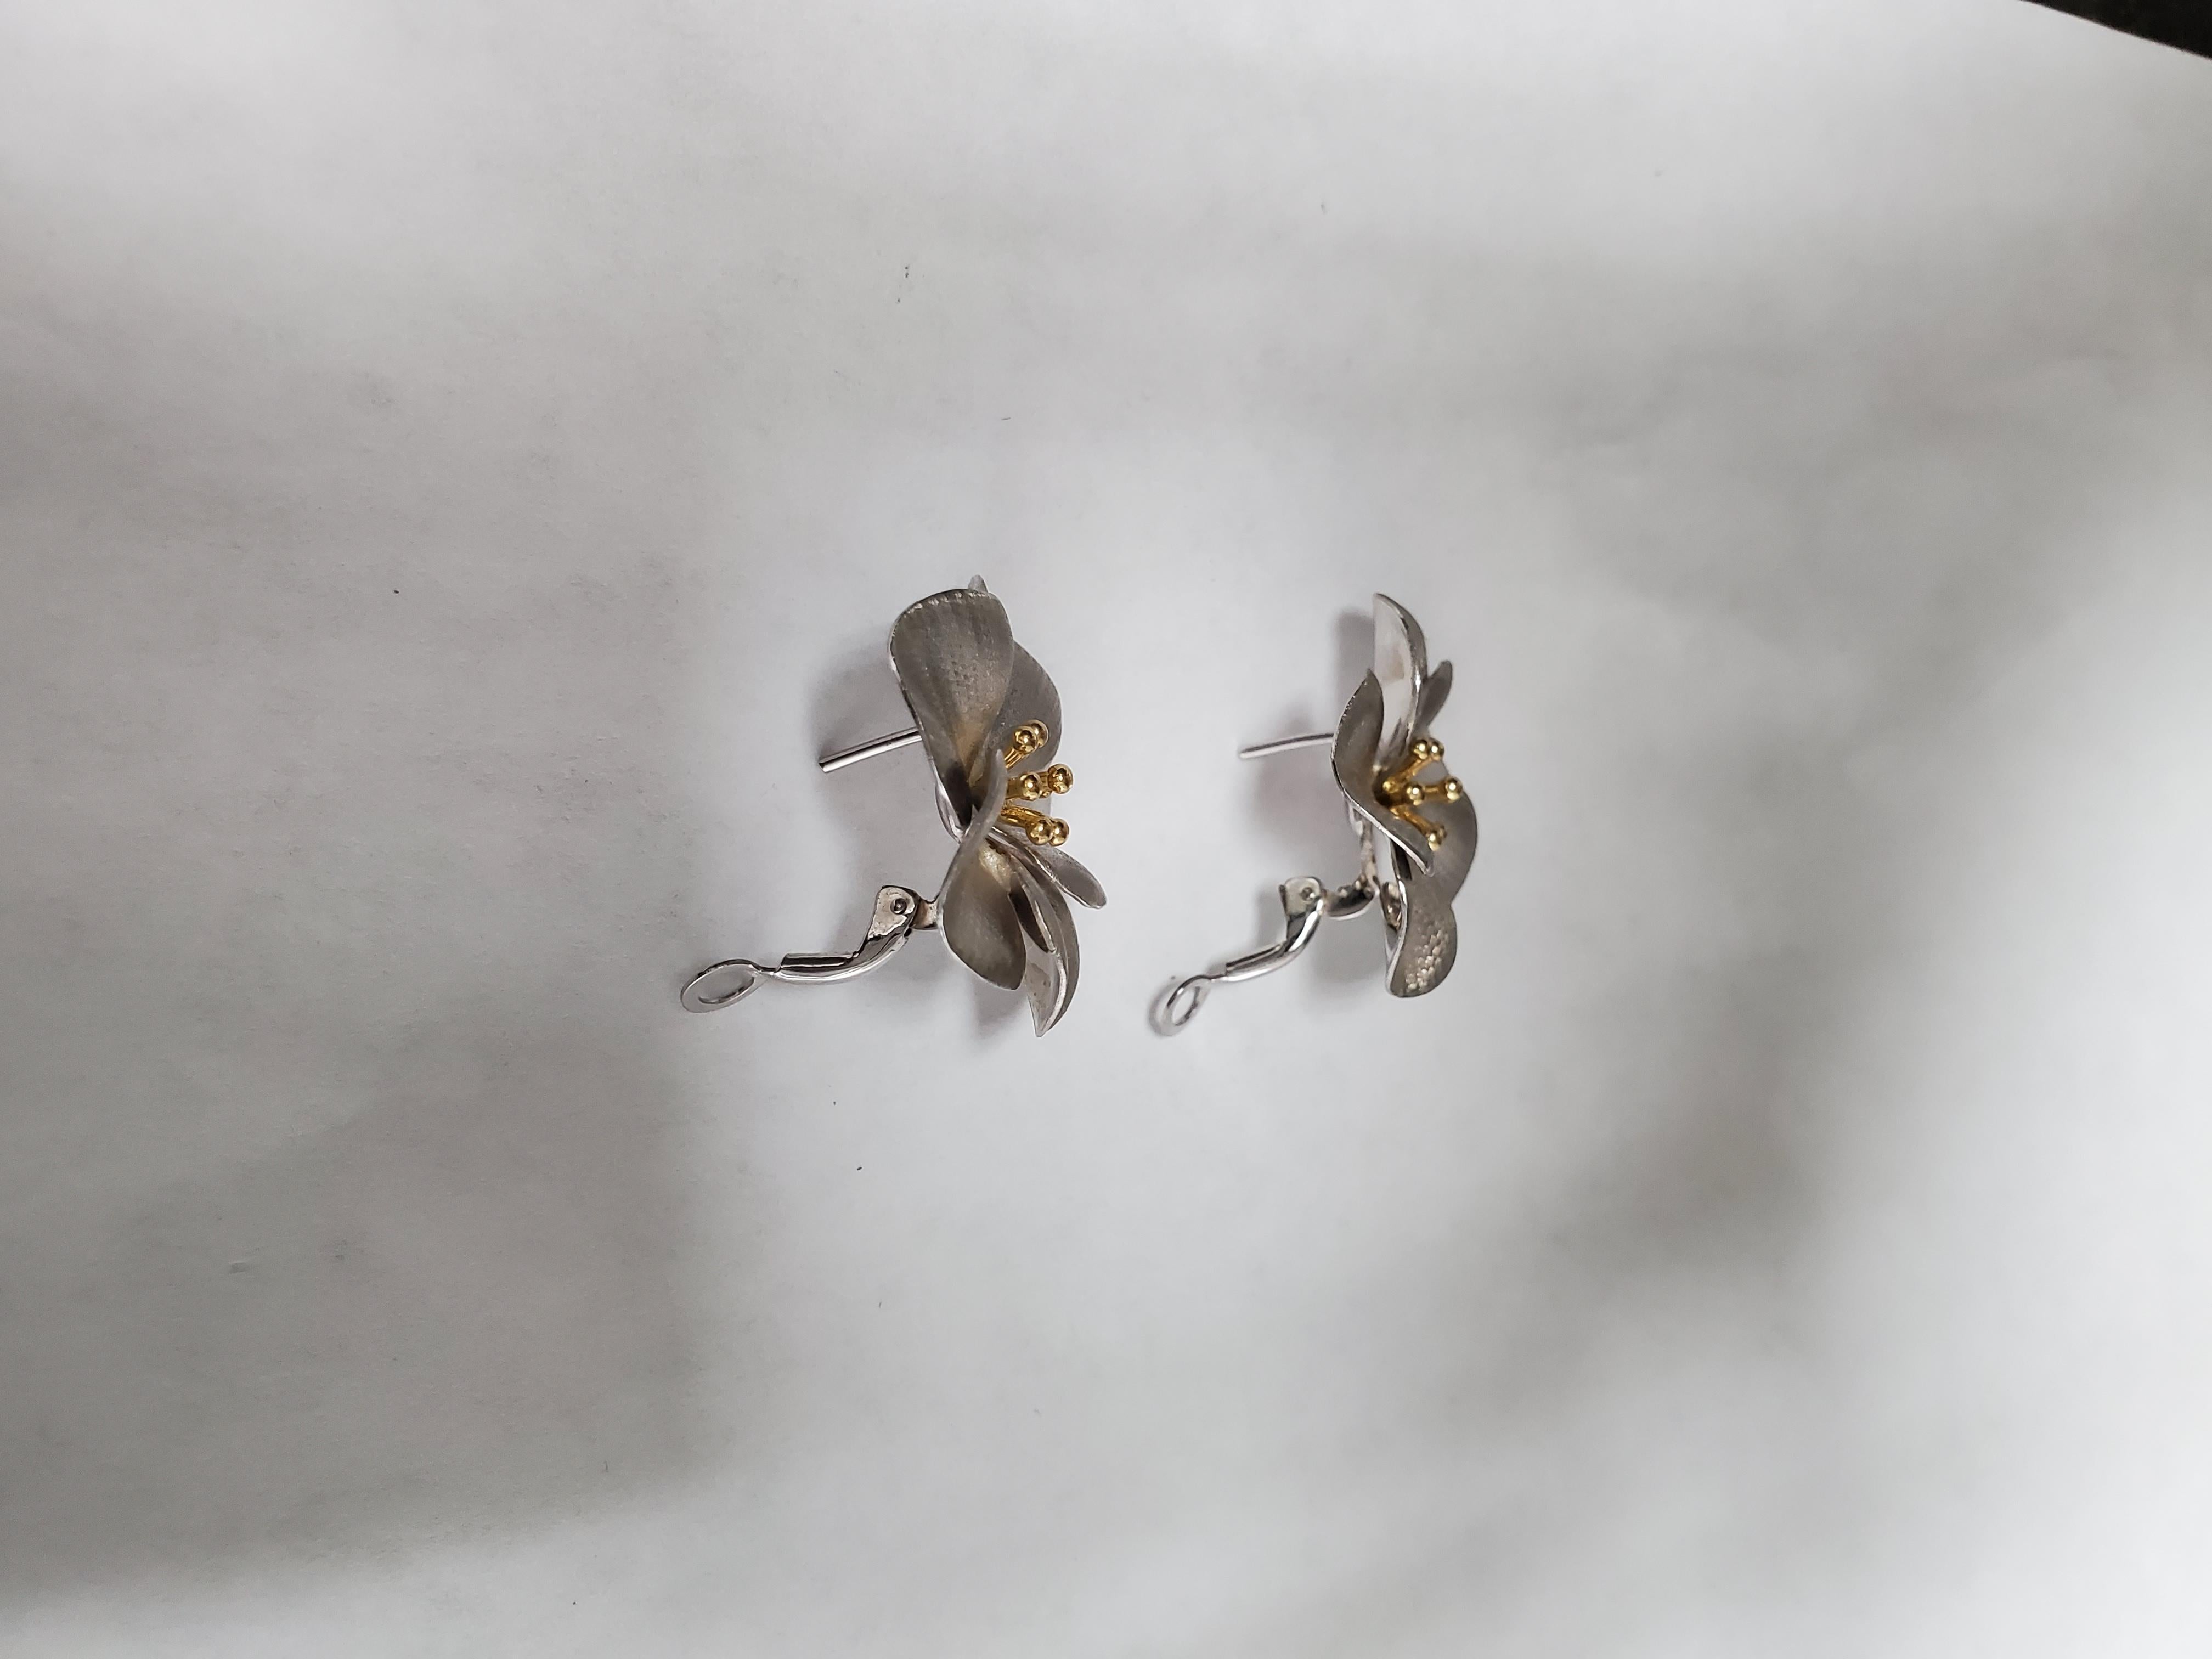 Beautiful Flower Petal Earrings in 14K White Gold In New Condition For Sale In Sugar Land, TX